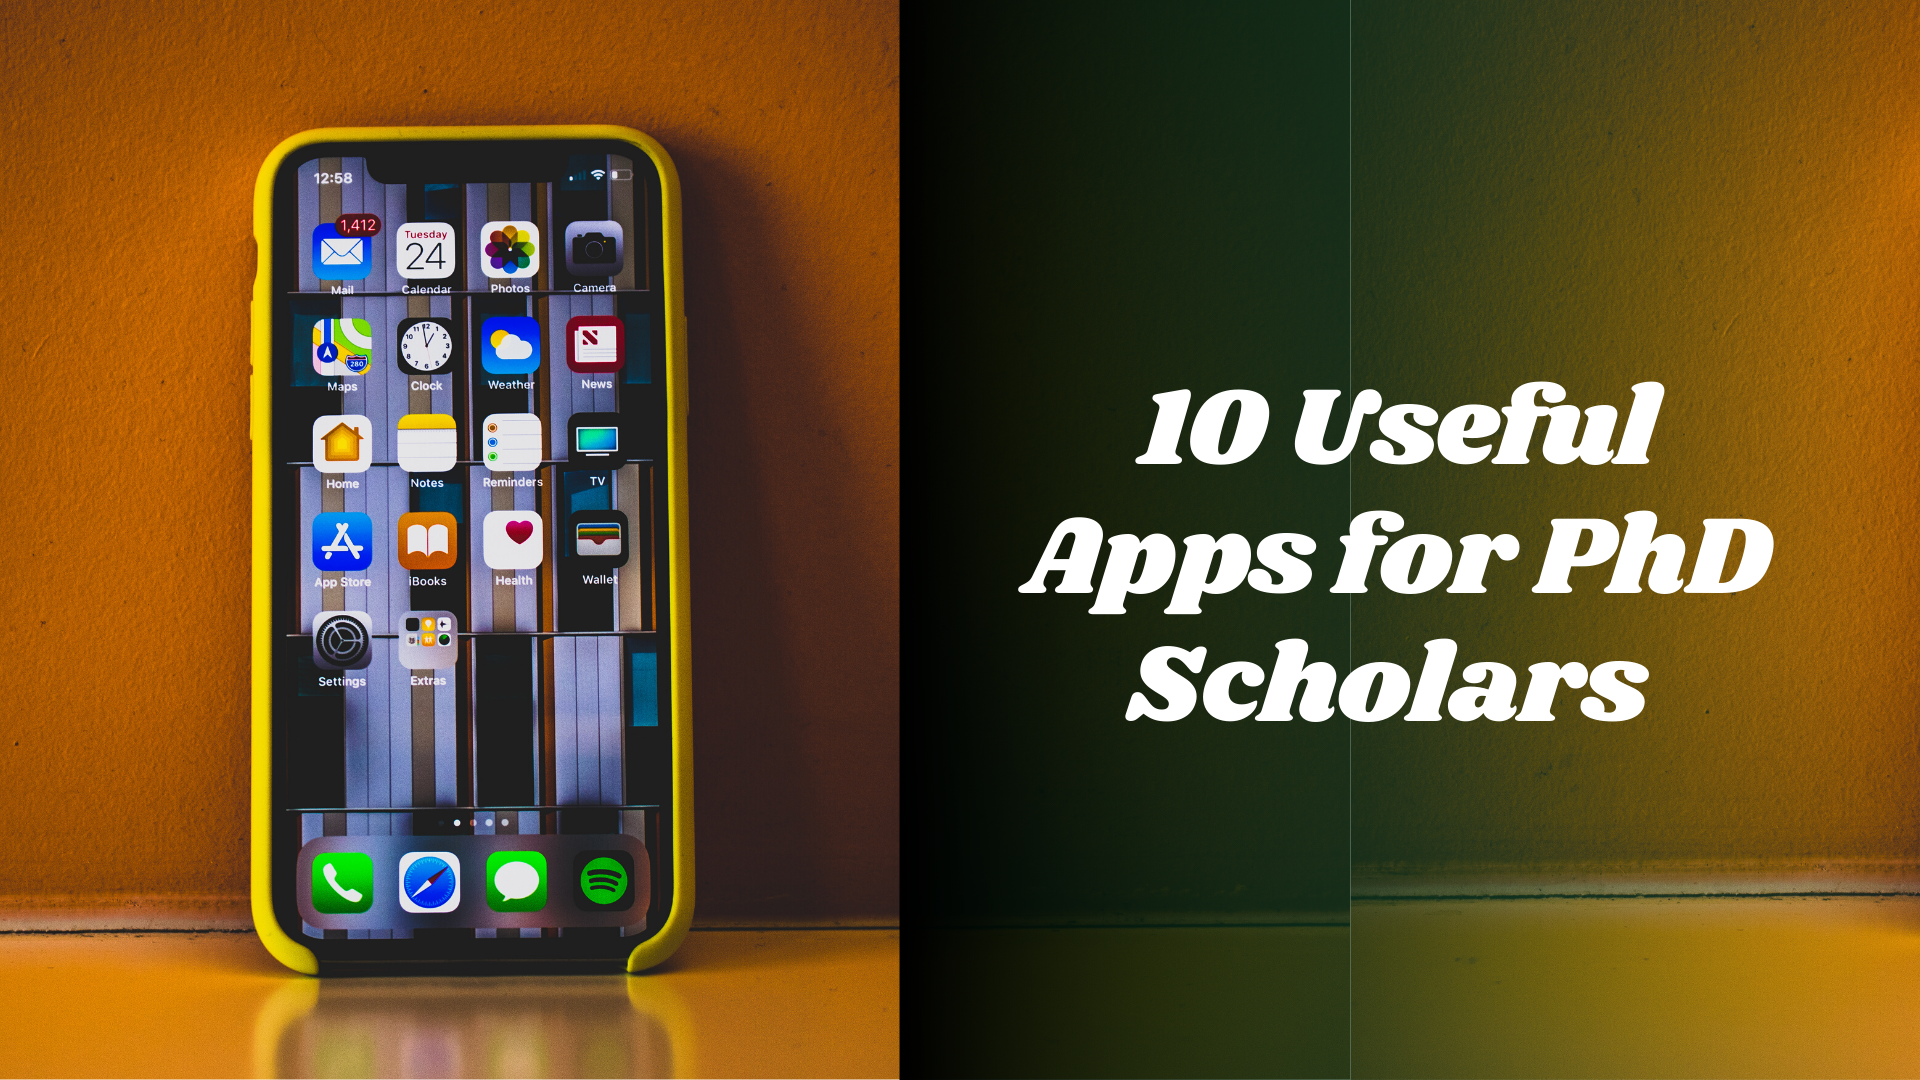 Best Apps for PhD Students